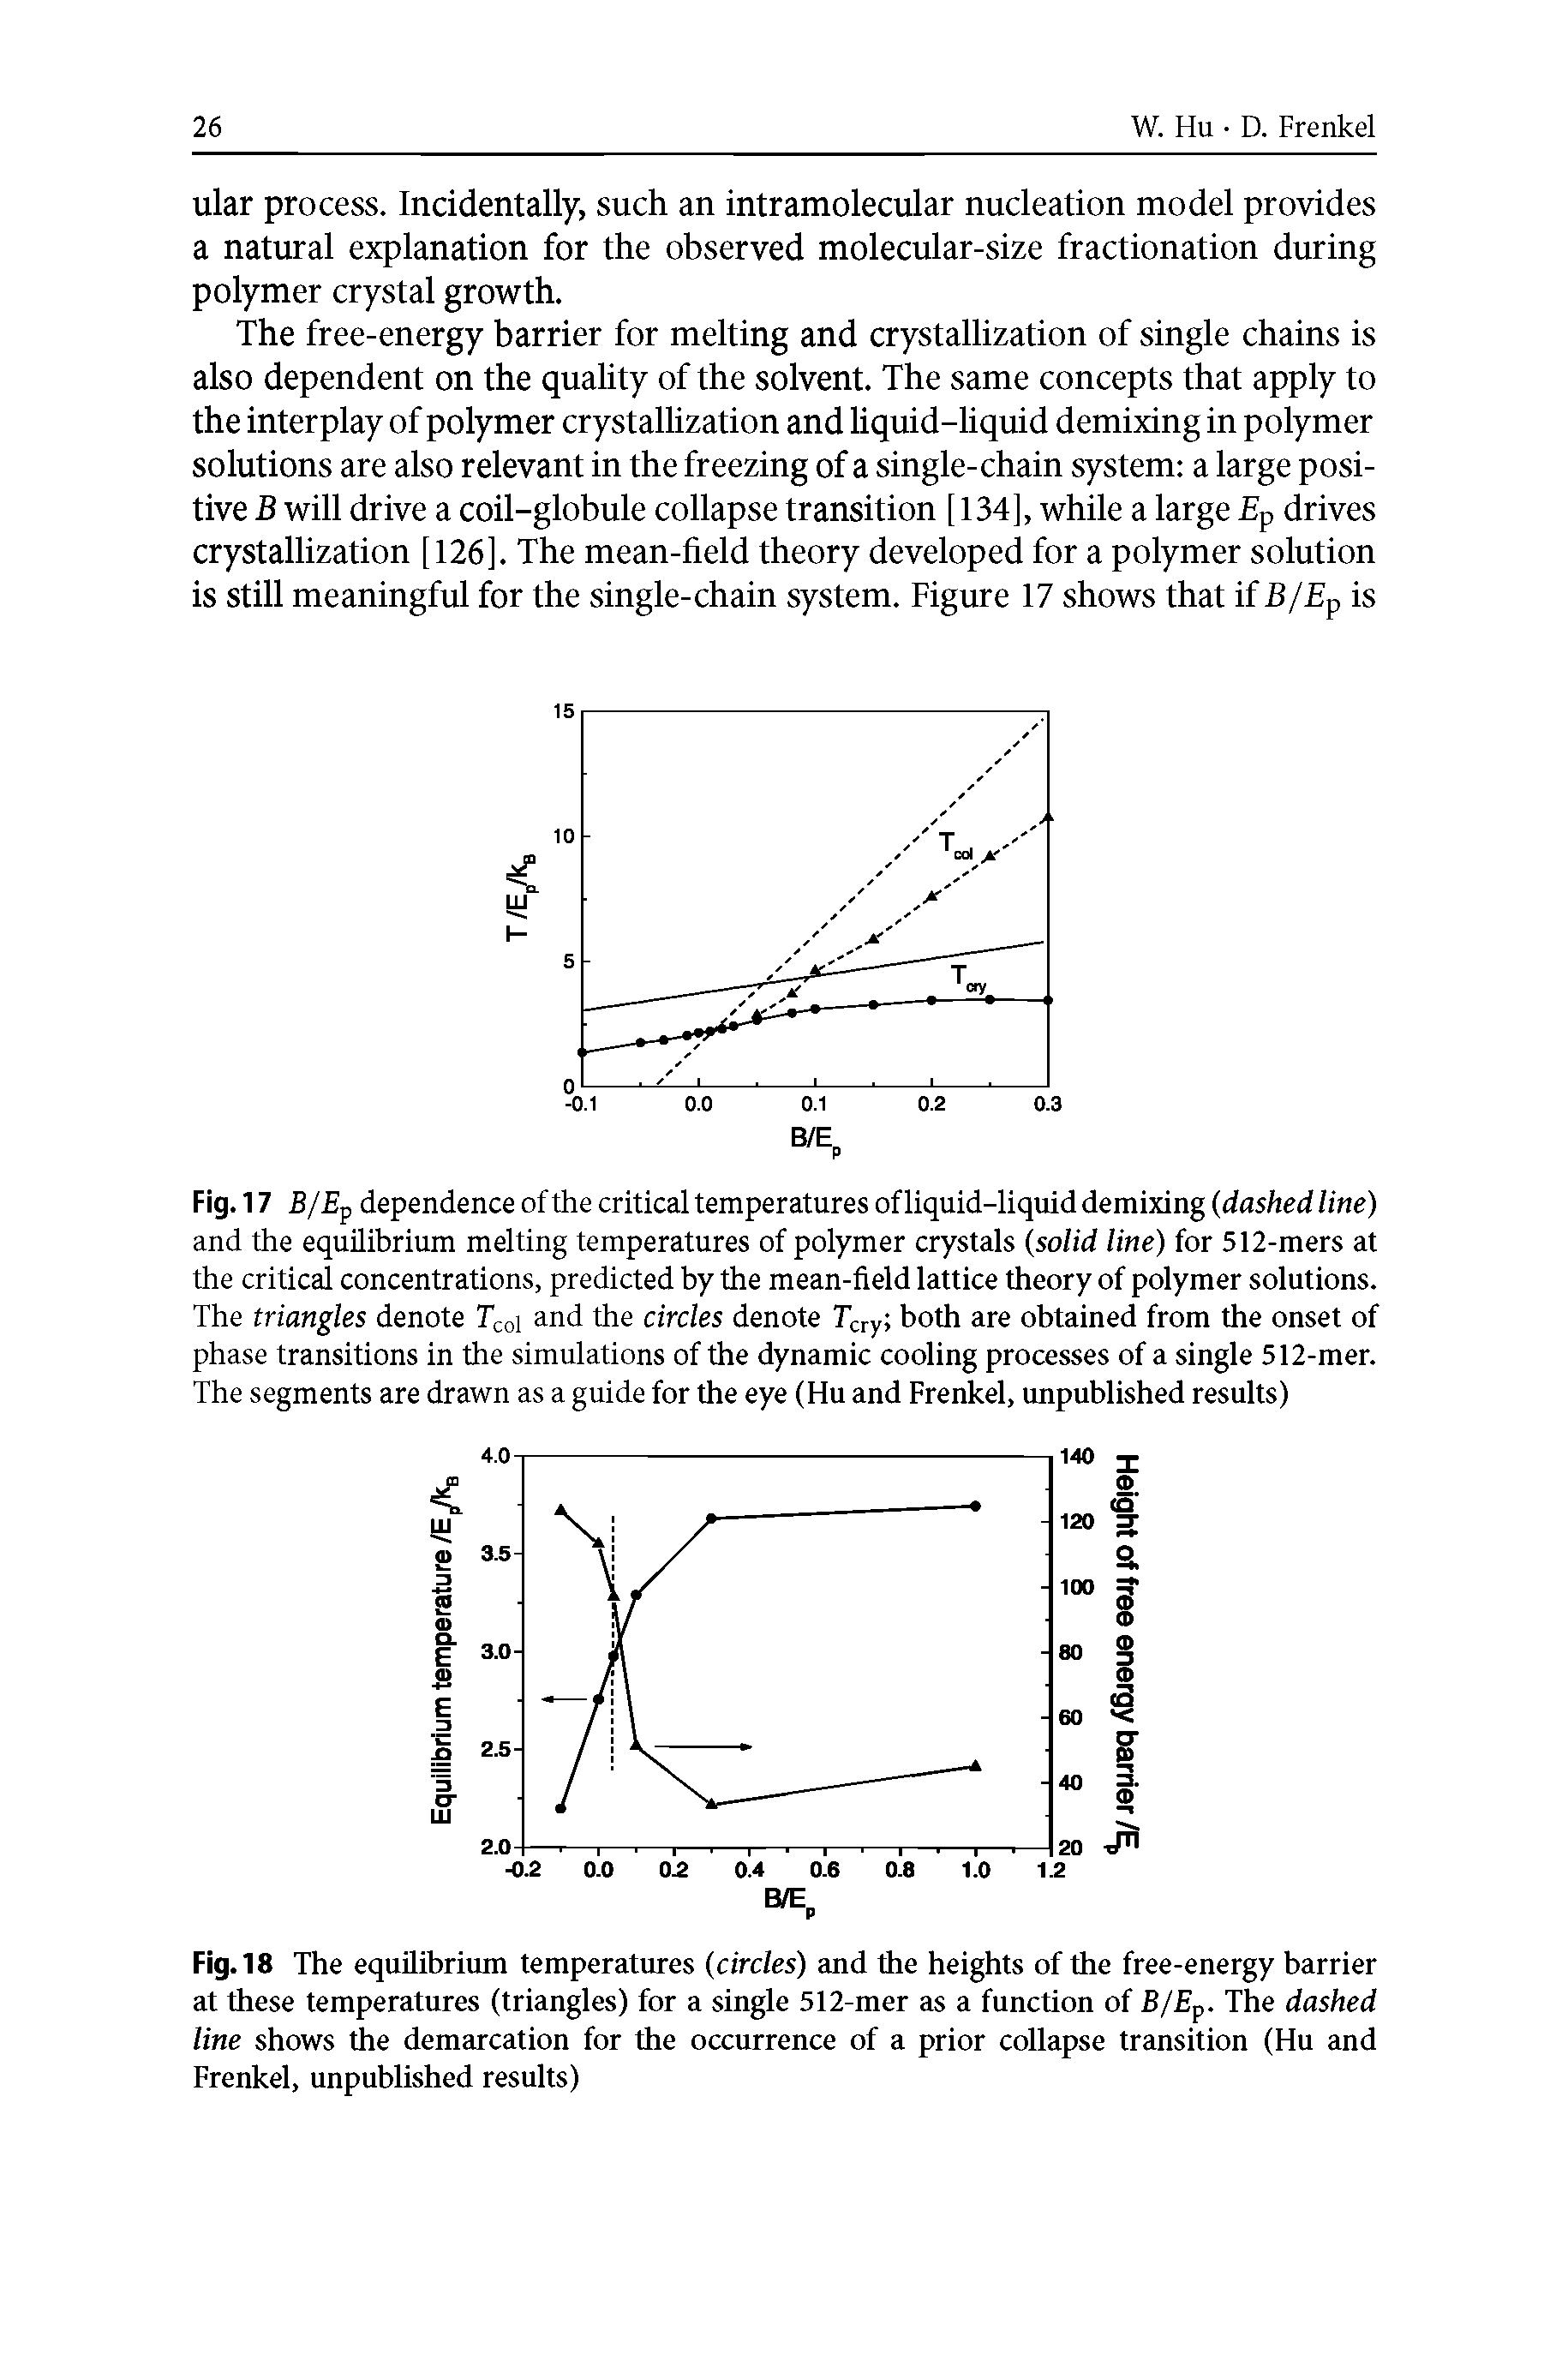 Fig. 17 B/E-p dependence of the critical temperatures of liquid-liquid demixing (dashed line) and the equilibrium melting temperatures of polymer crystals (solid line) for 512-mers at the critical concentrations, predicted by the mean-field lattice theory of polymer solutions. The triangles denote Tcol and the circles denote T cry both are obtained from the onset of phase transitions in the simulations of the dynamic cooling processes of a single 512-mer. The segments are drawn as a guide for the eye (Hu and Frenkel, unpublished results)...